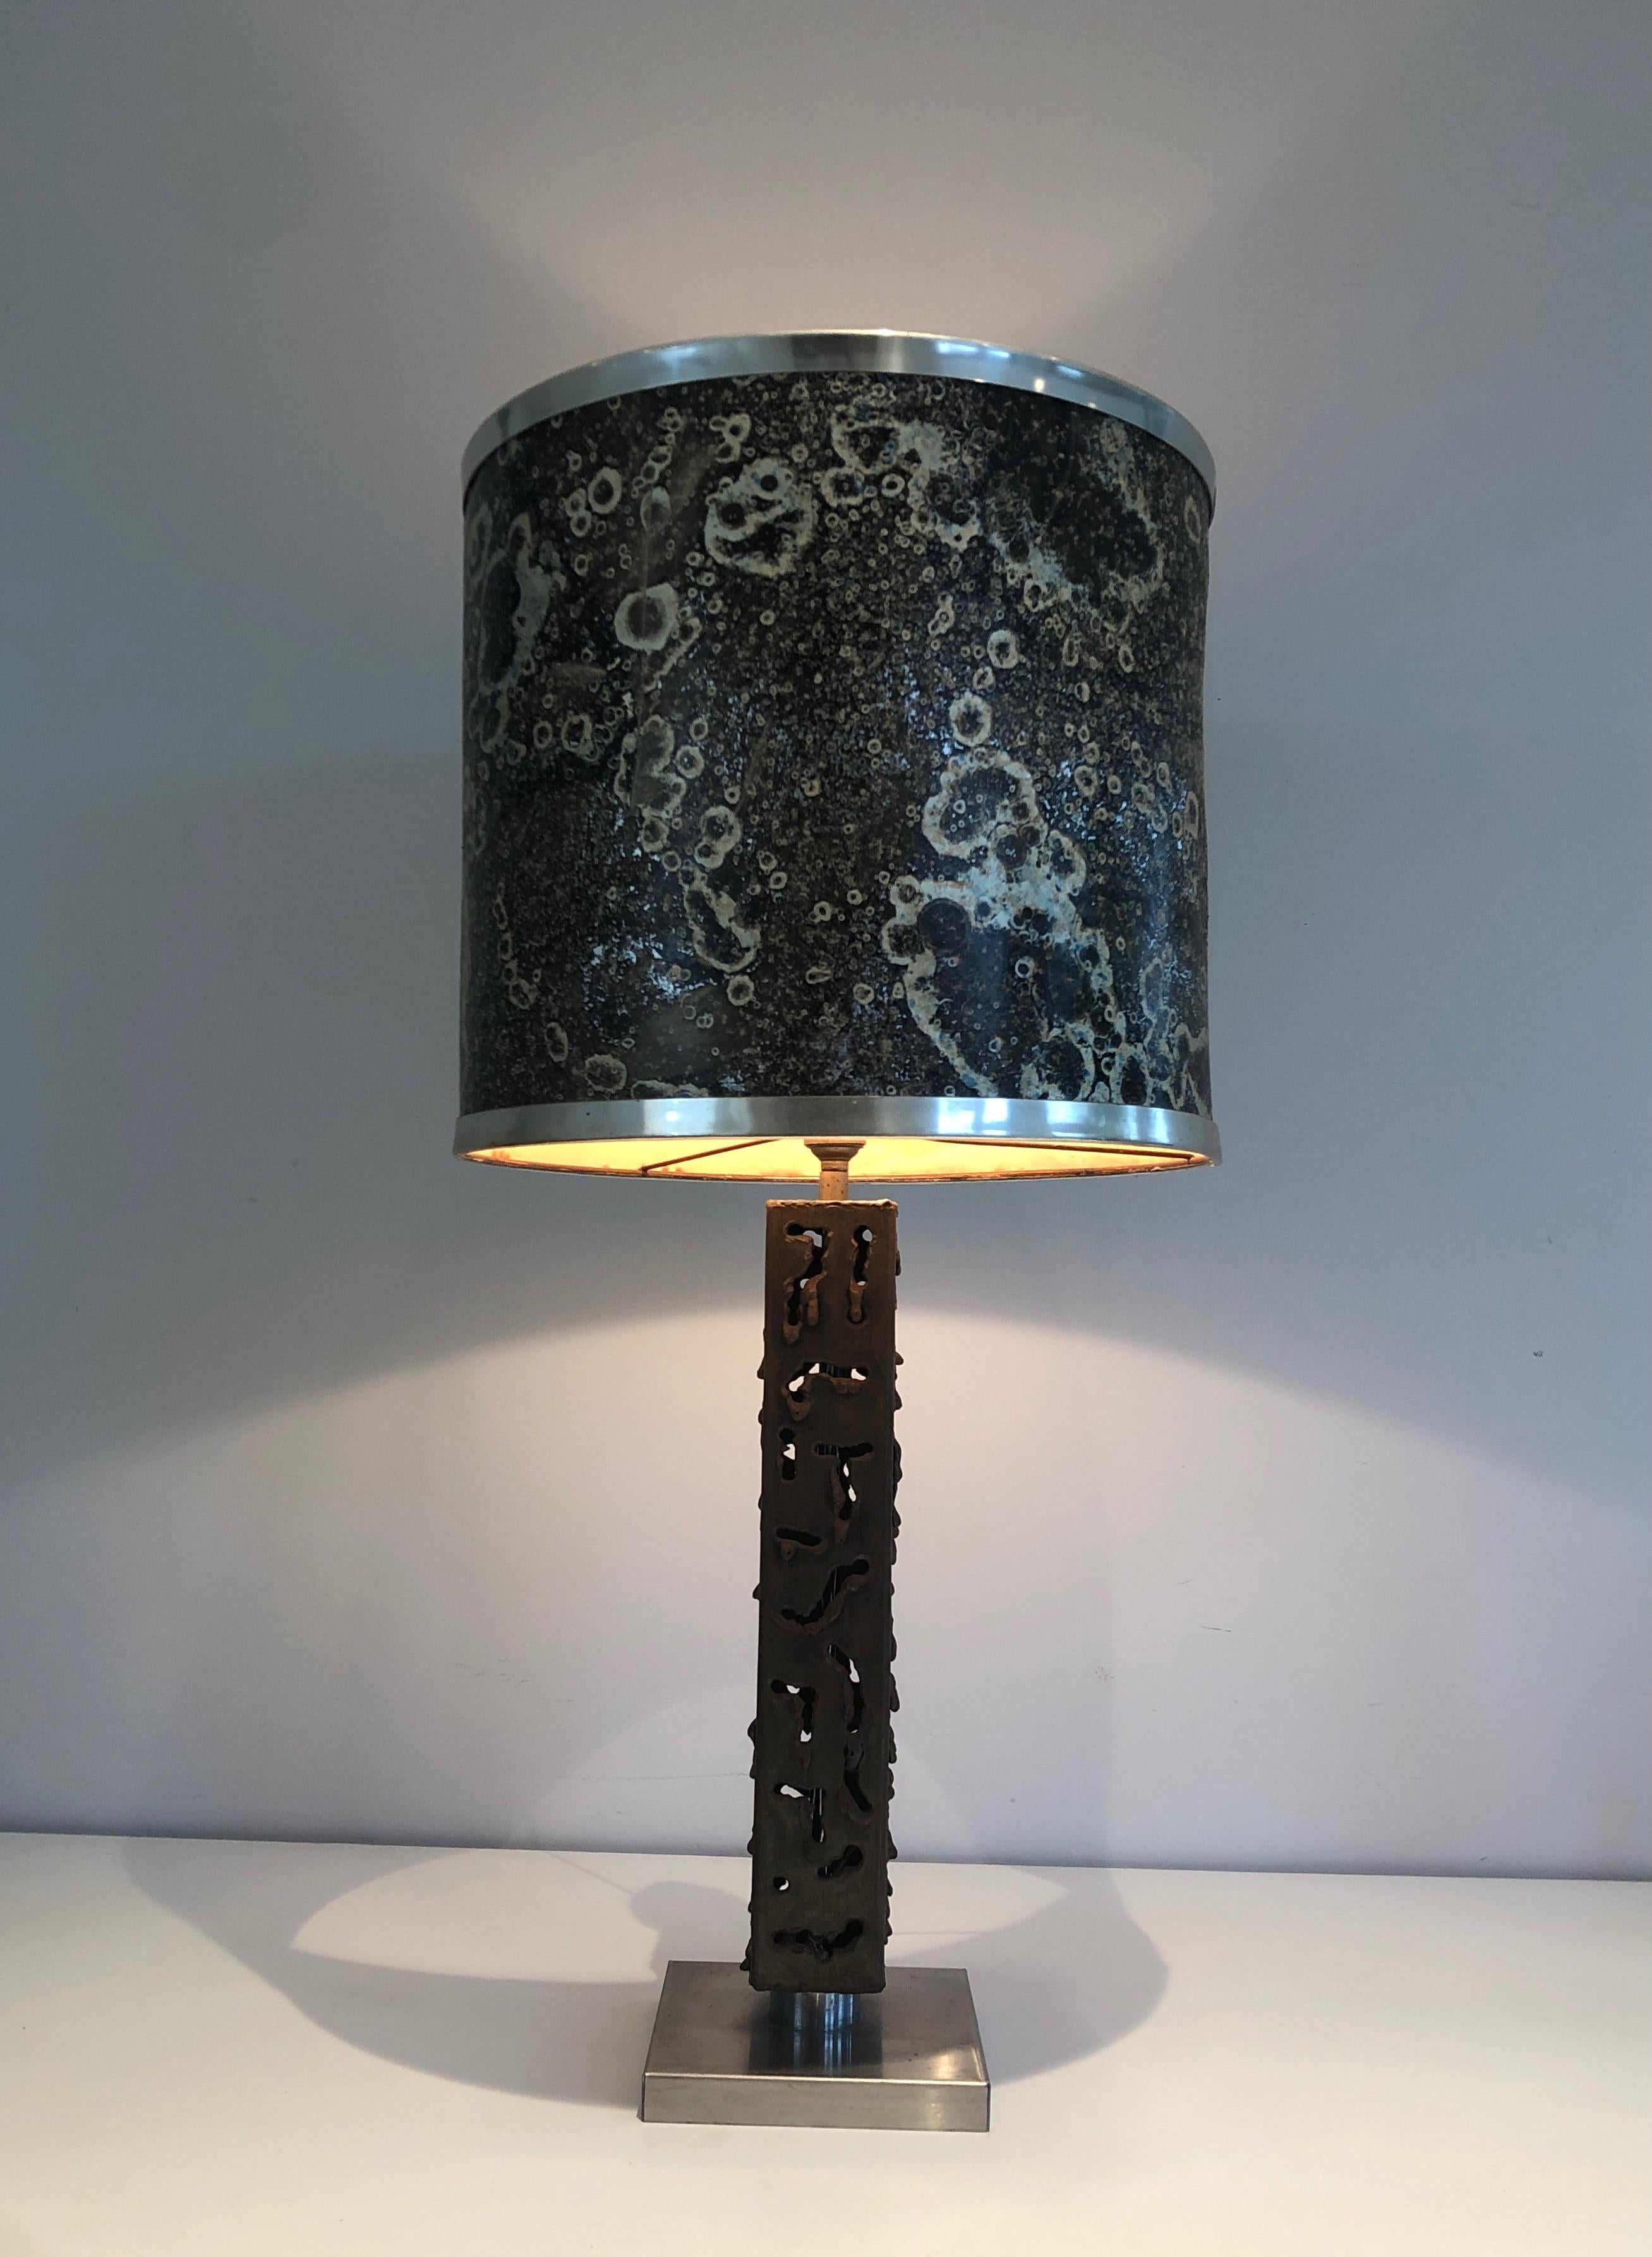 Worked Steel Design Table Lamp, French Work, circa 1970 For Sale 8